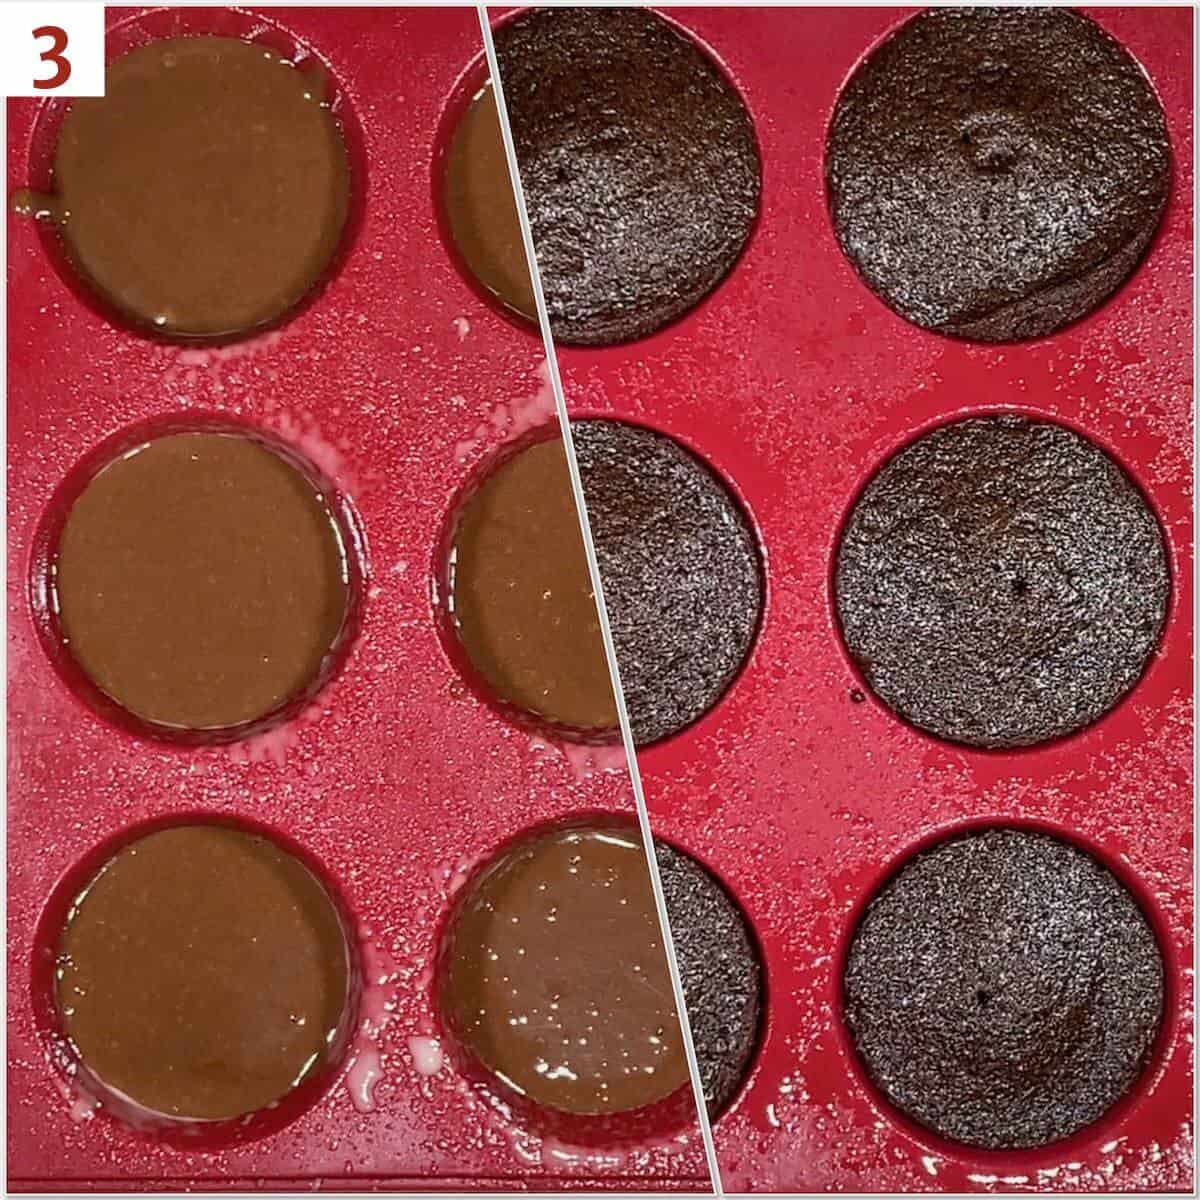 One-bowl chocolate cake before after baking collage